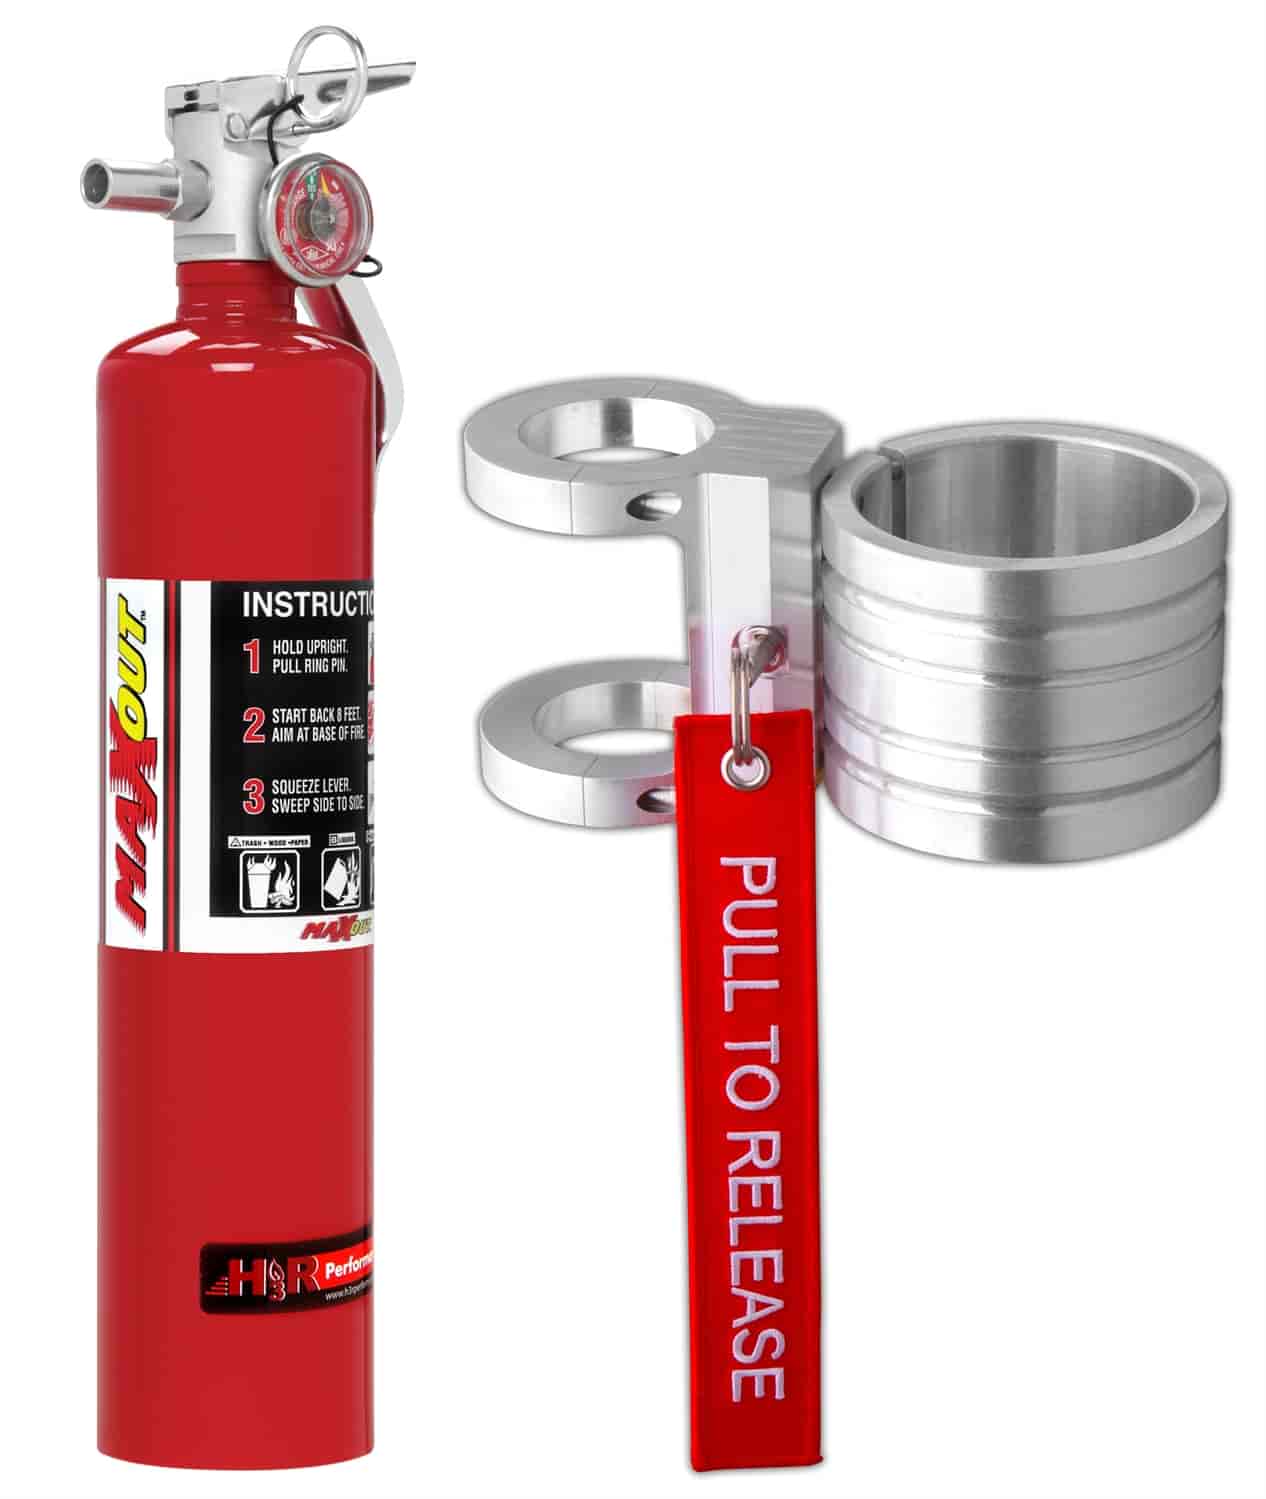 MaxOut Dry Chemical Fire Extinguisher Kit Red 2.5-lb bottle